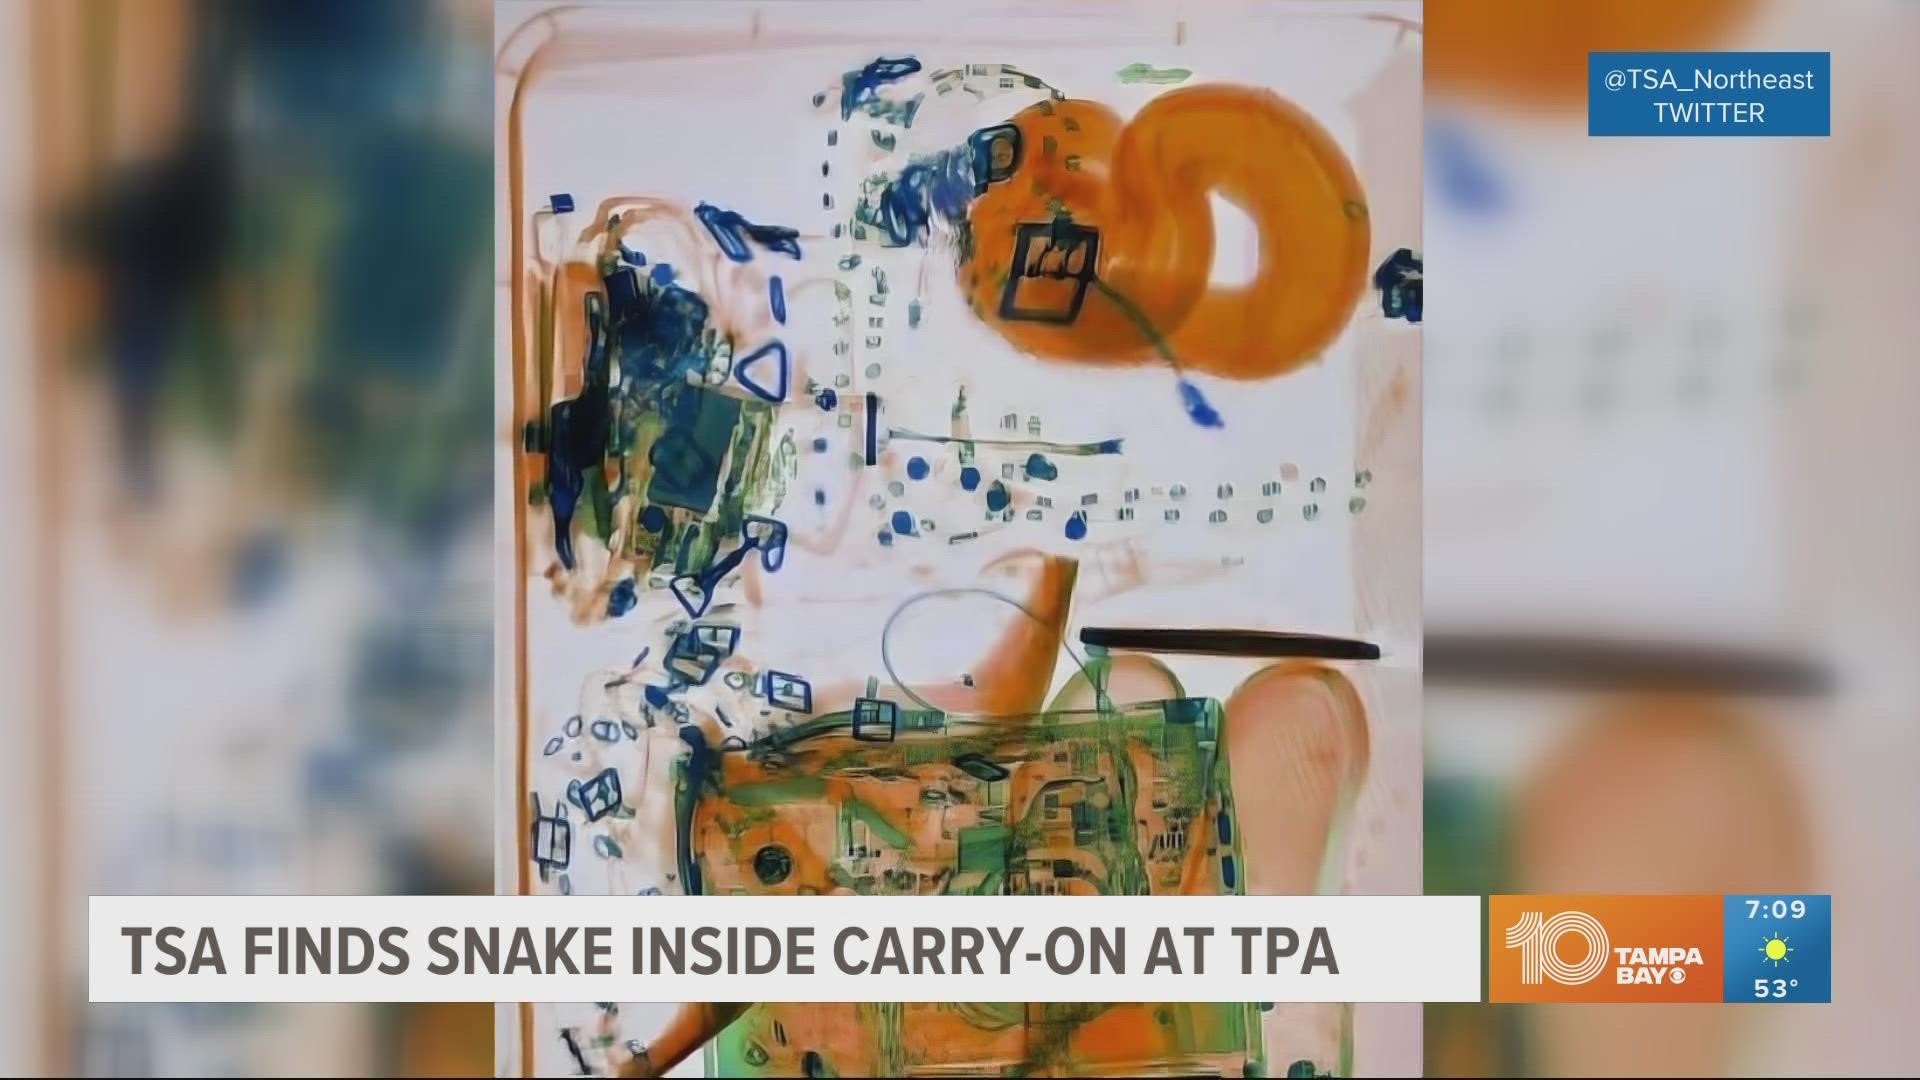 TSA officers noticed the snake coiled up in the carry-on luggage while it went through the X-ray machine.